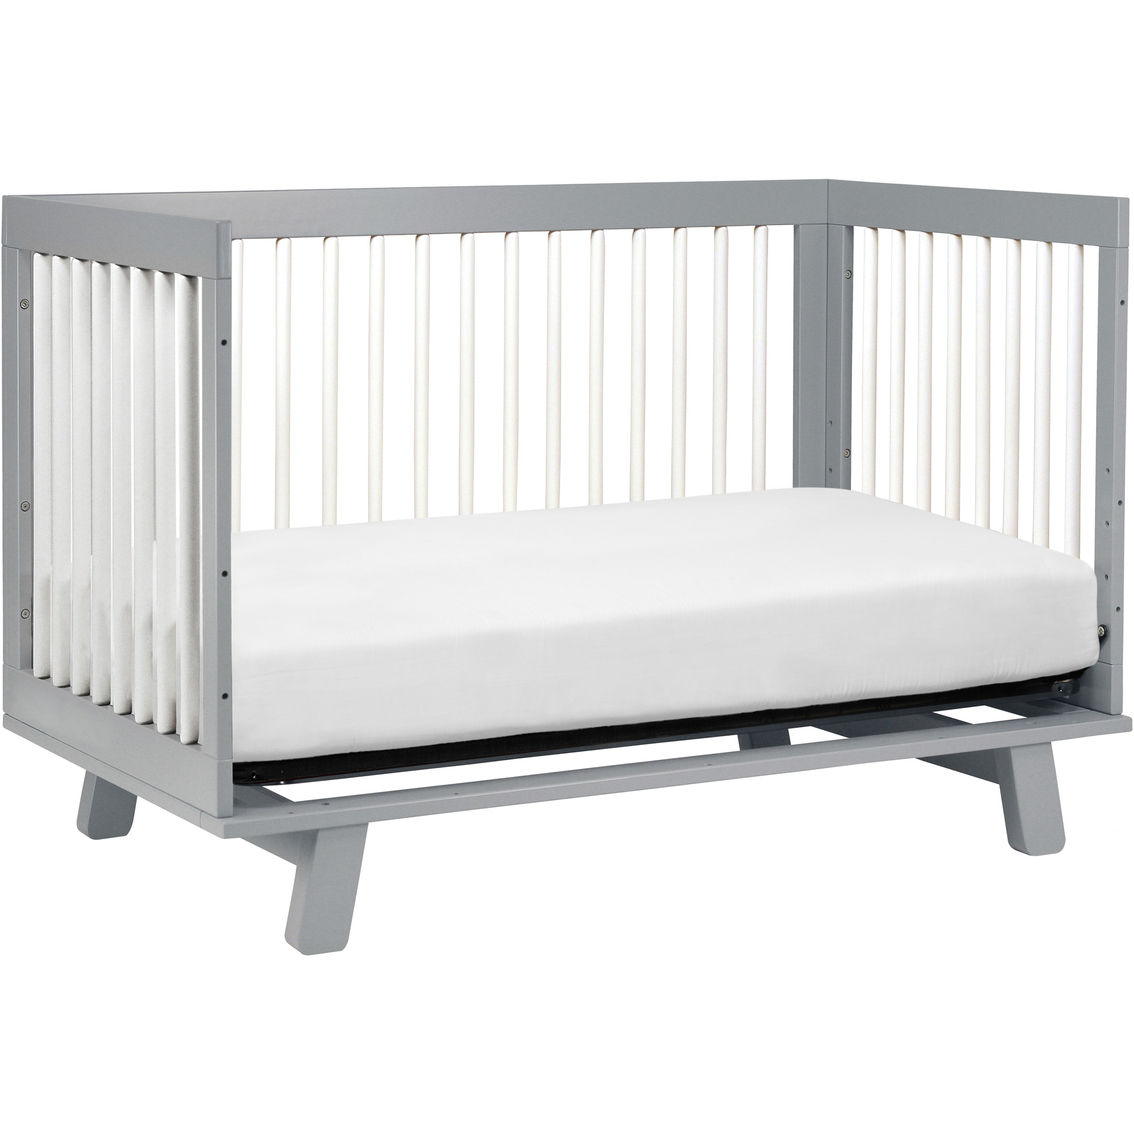 Babyletto Hudson 3 in 1 Convertible Crib - Image 5 of 8